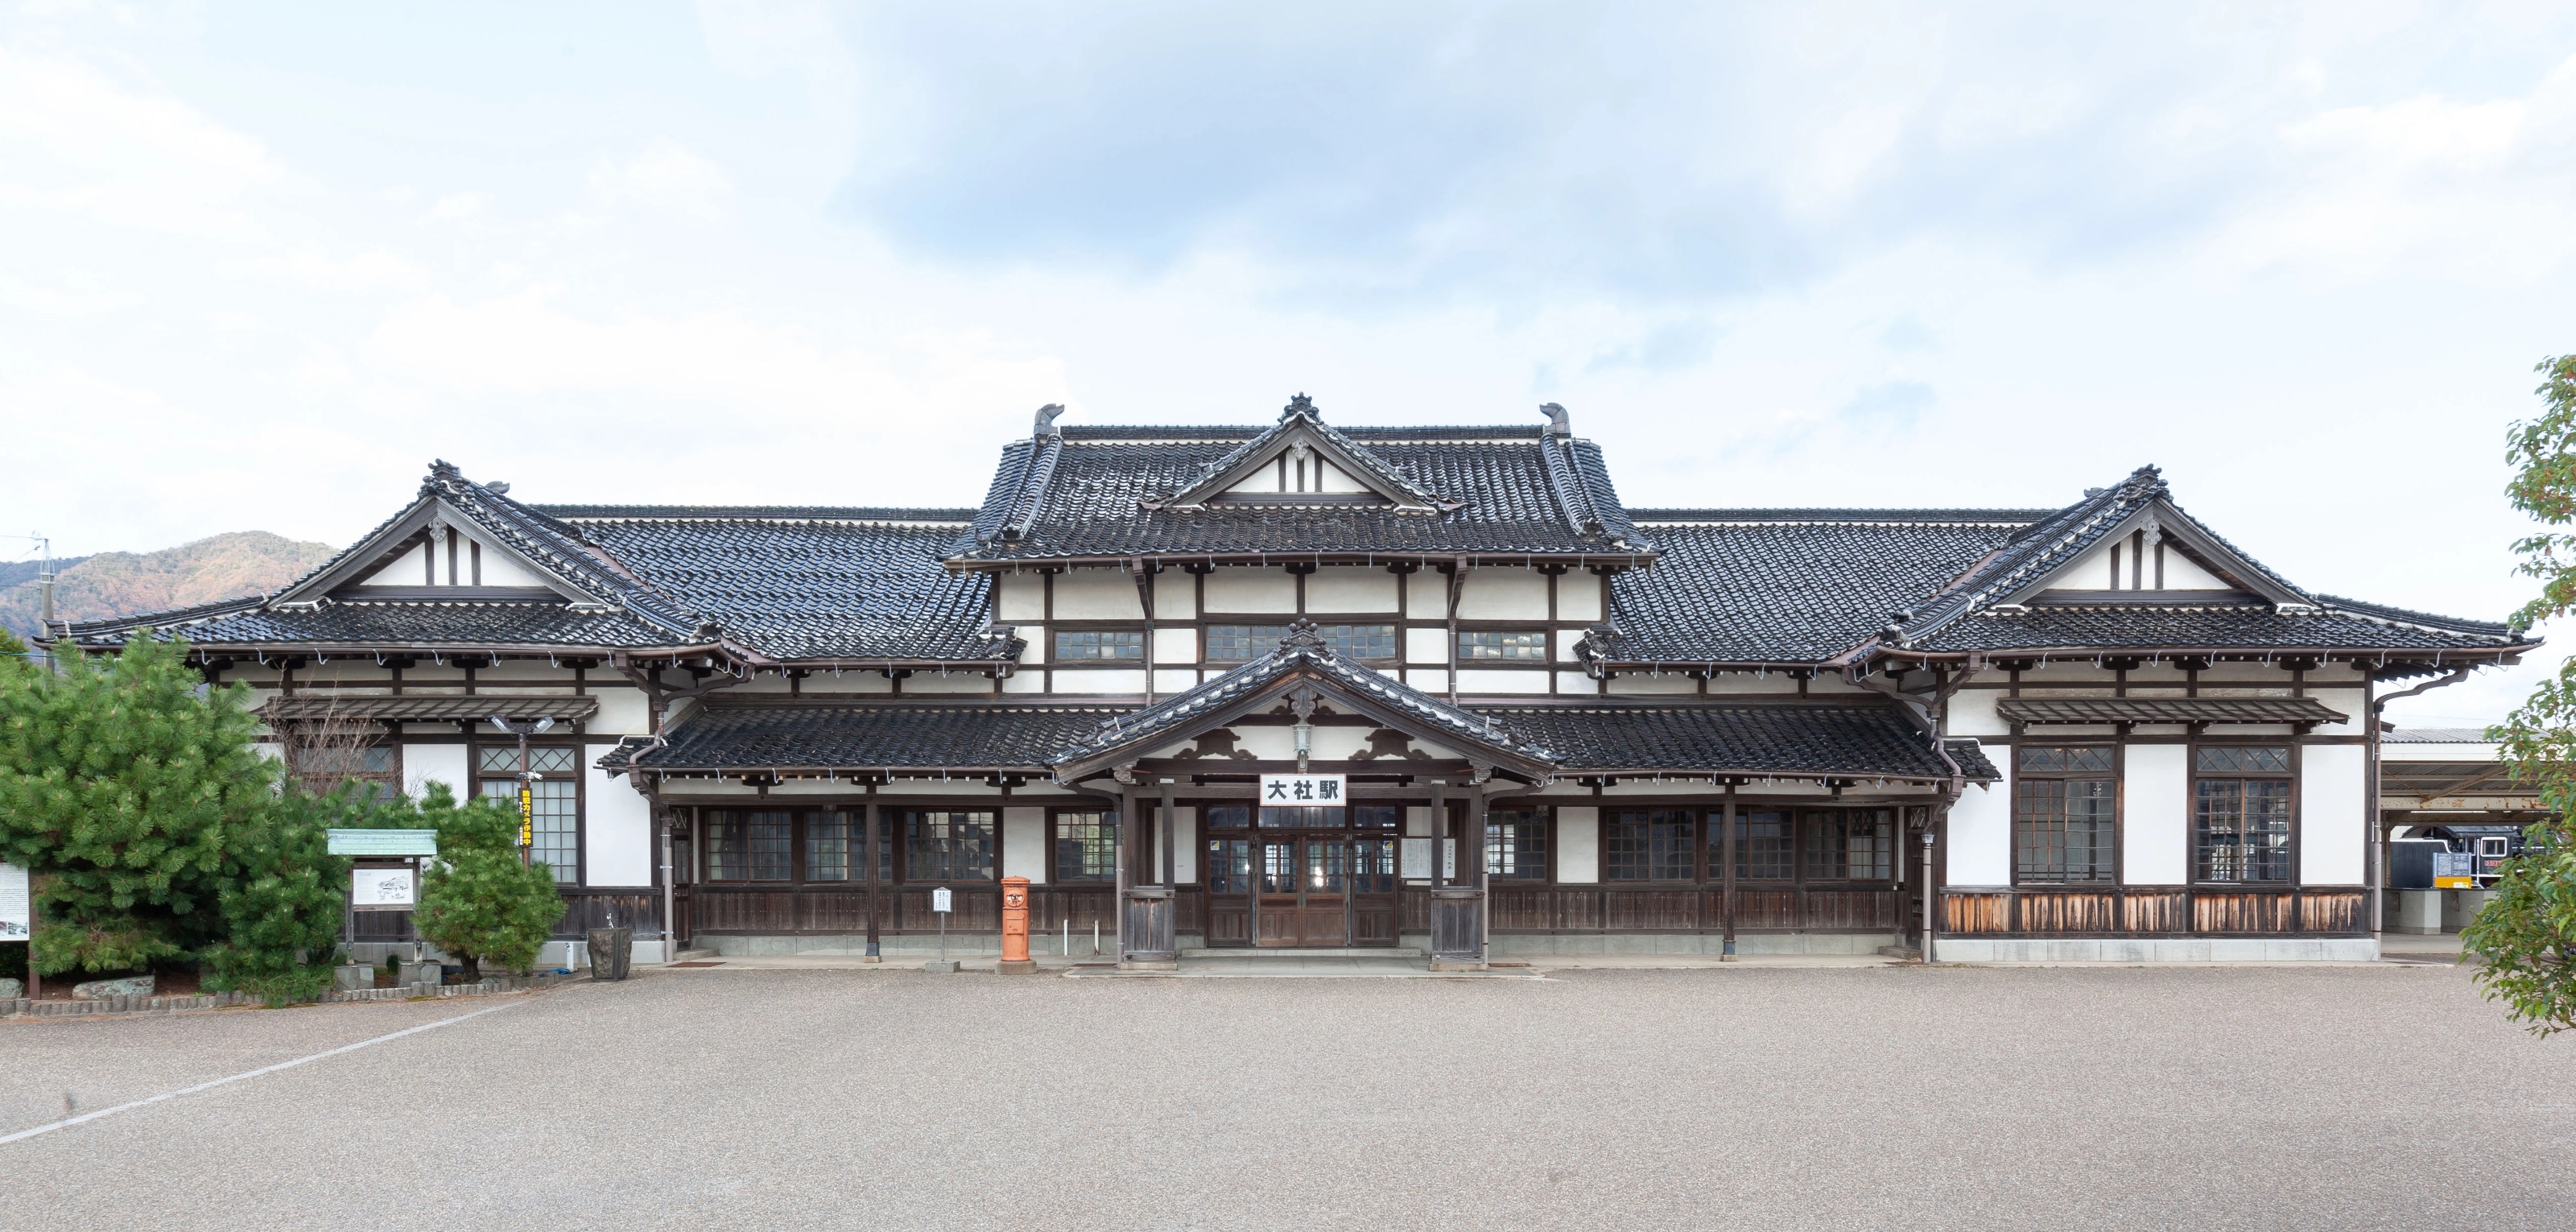 Historical Structure　Preservation and Repair of Station Building in the Land of Eight Million Gods　Important Cultural Property: Preservation and Repair of Former Taisha Station Building